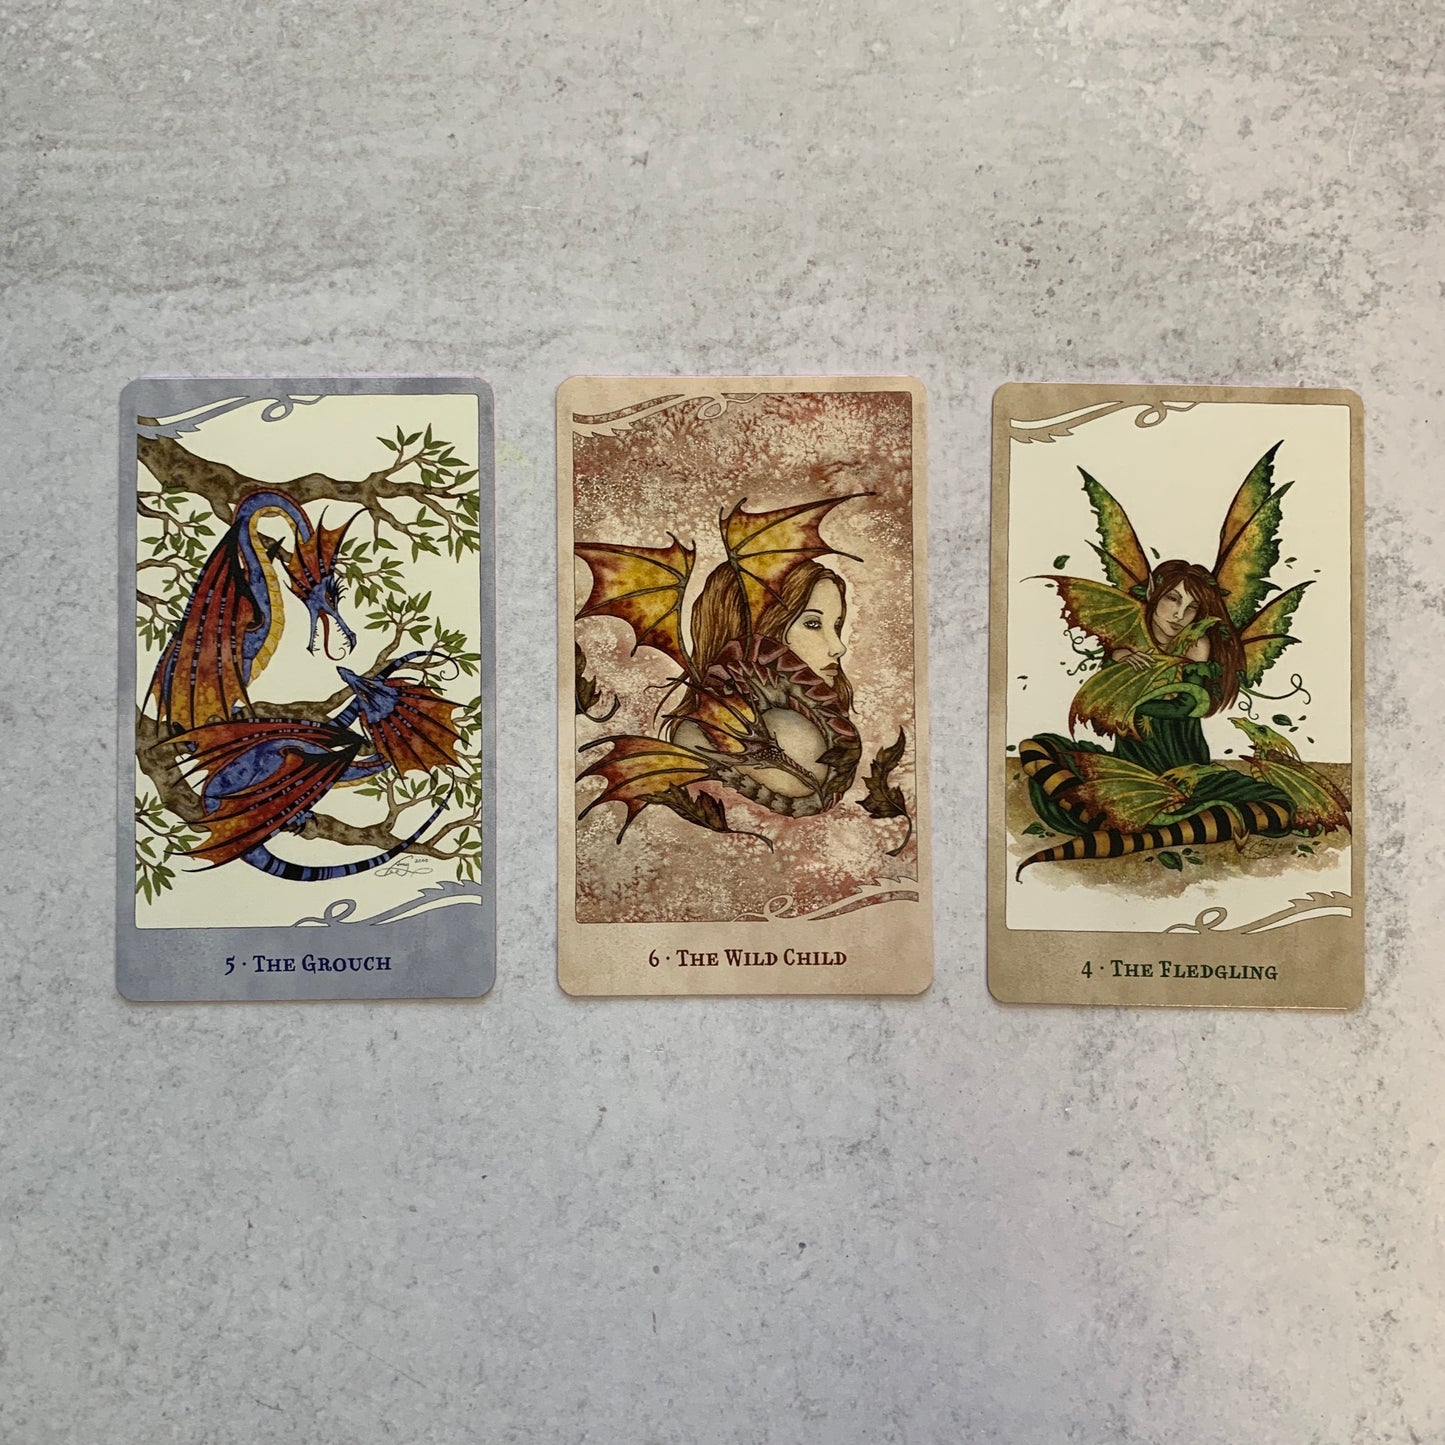 For The Love of Dragons Cards by Angi Sullins (Author), Amy Brown (Illustrator)